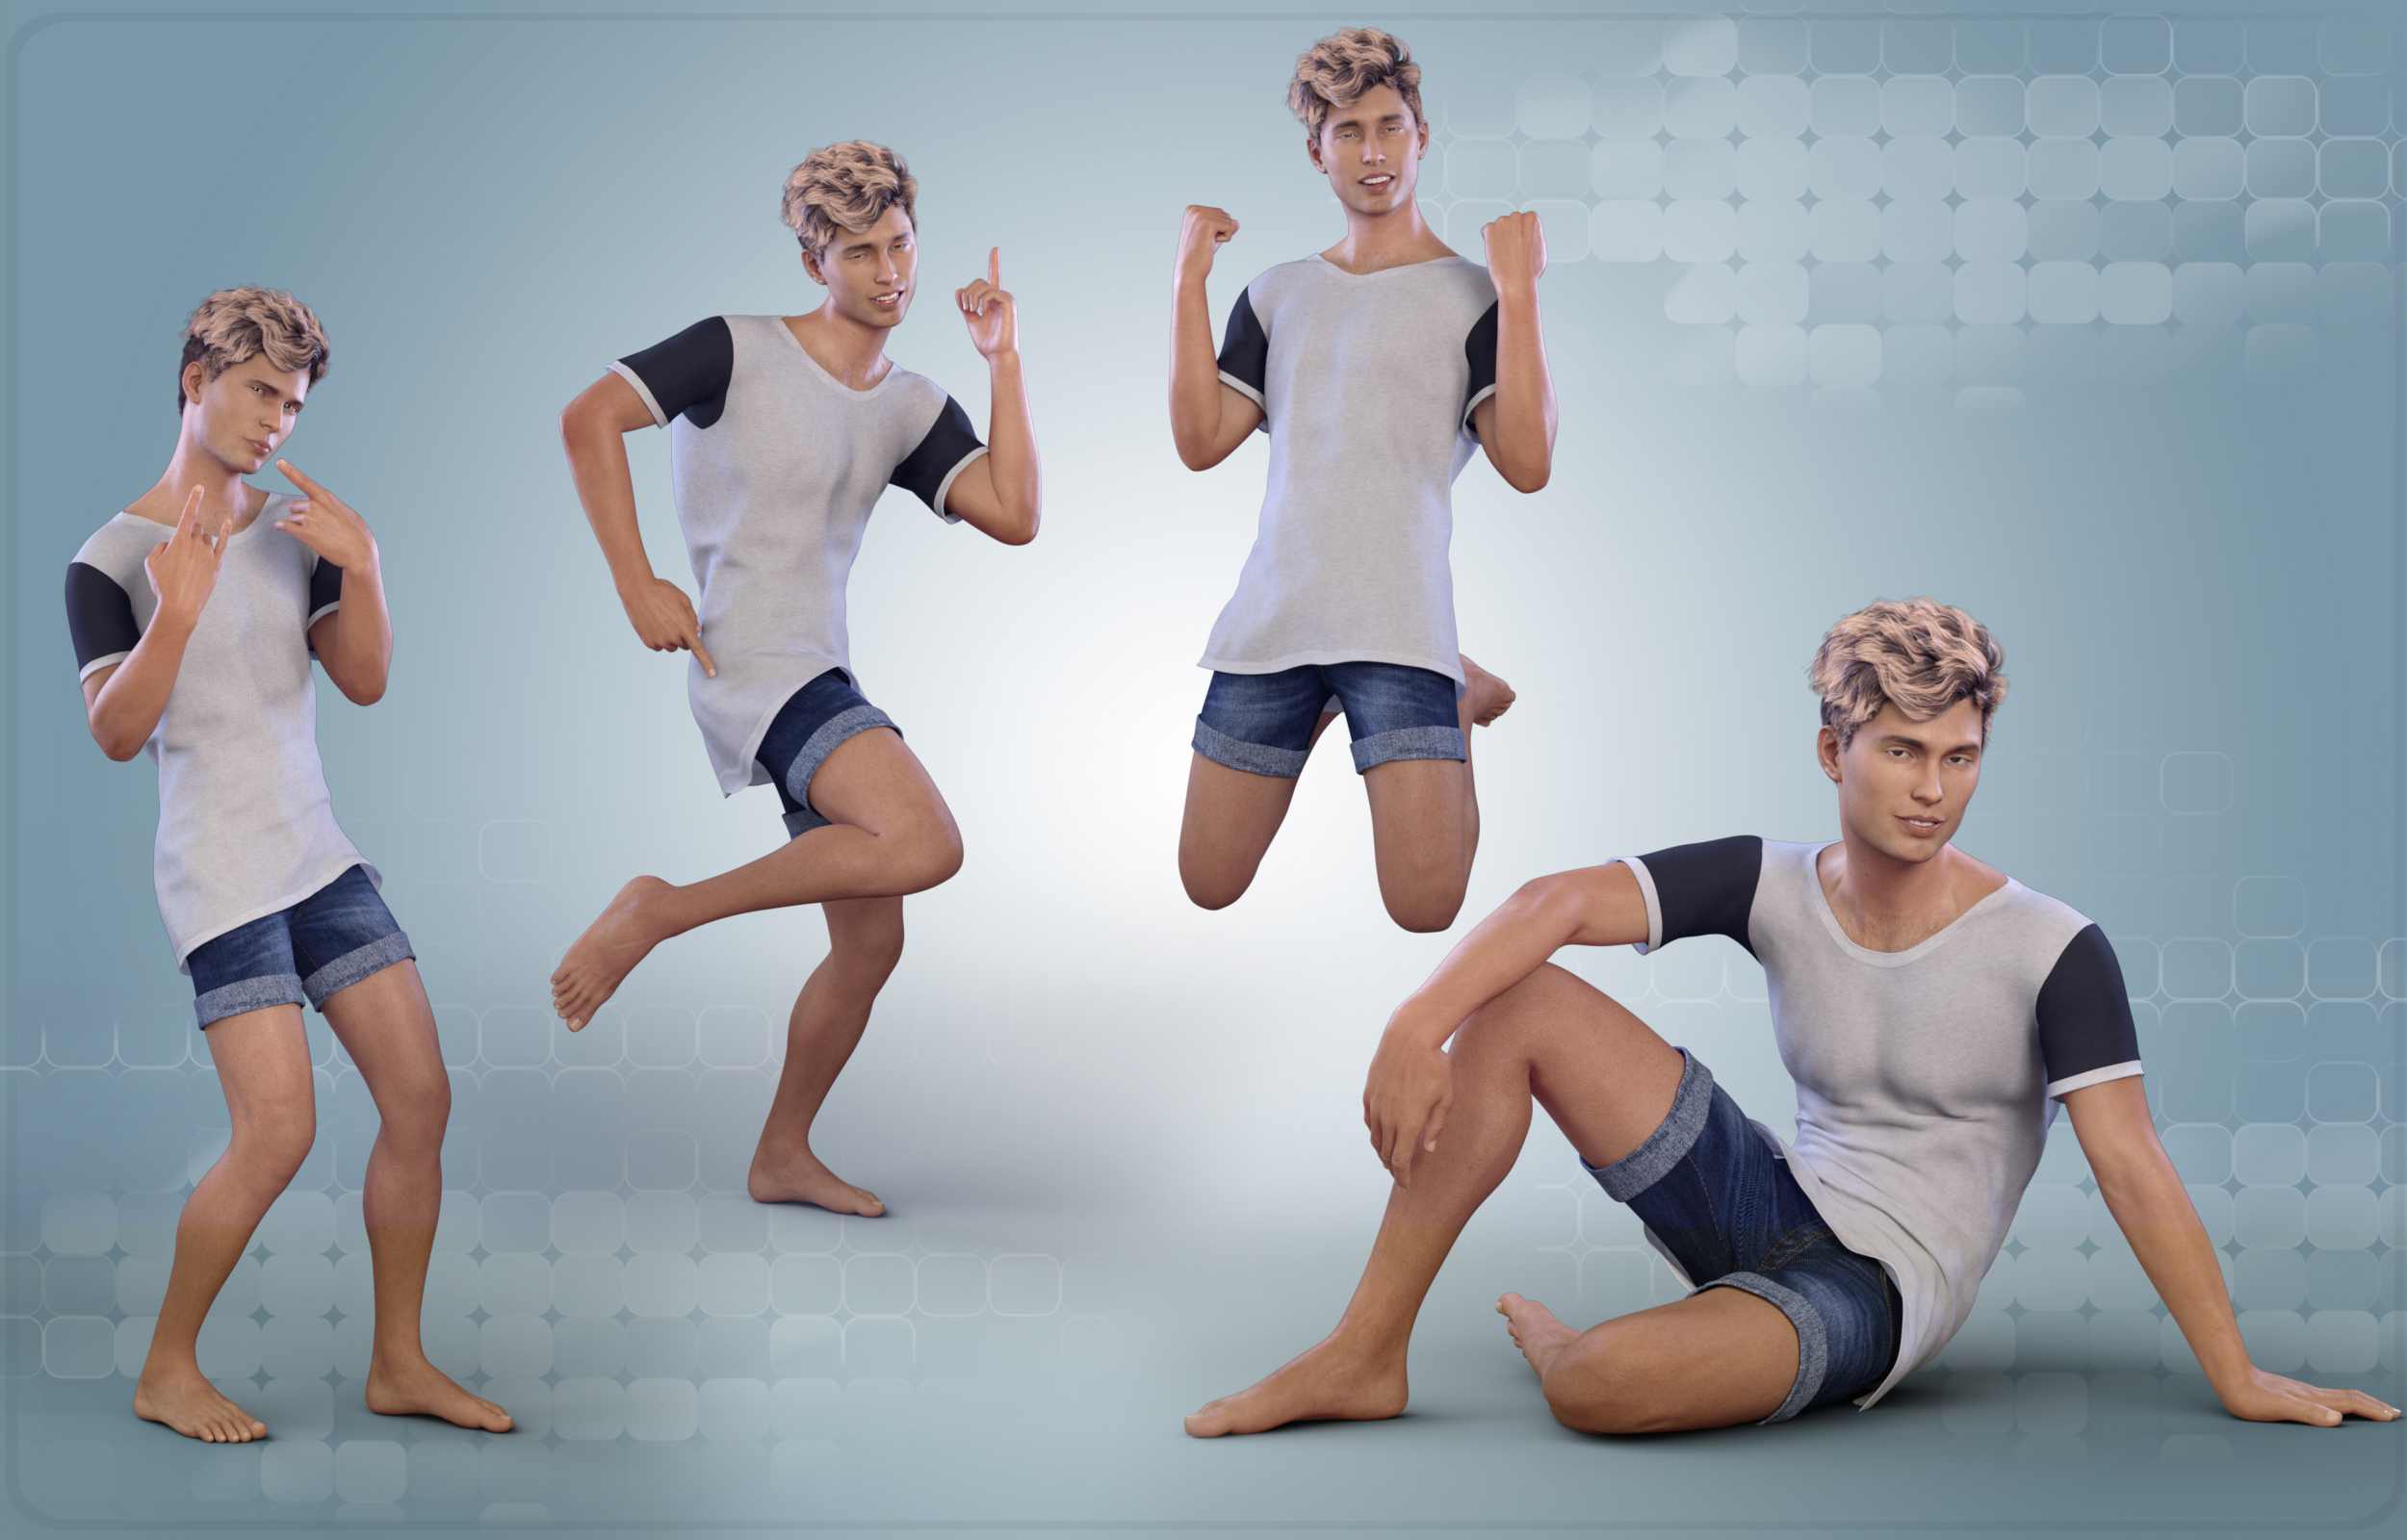 Z Heartbreaker - Poses and Expressions for Genesis 8 Male(s) by: Zeddicuss, 3D Models by Daz 3D